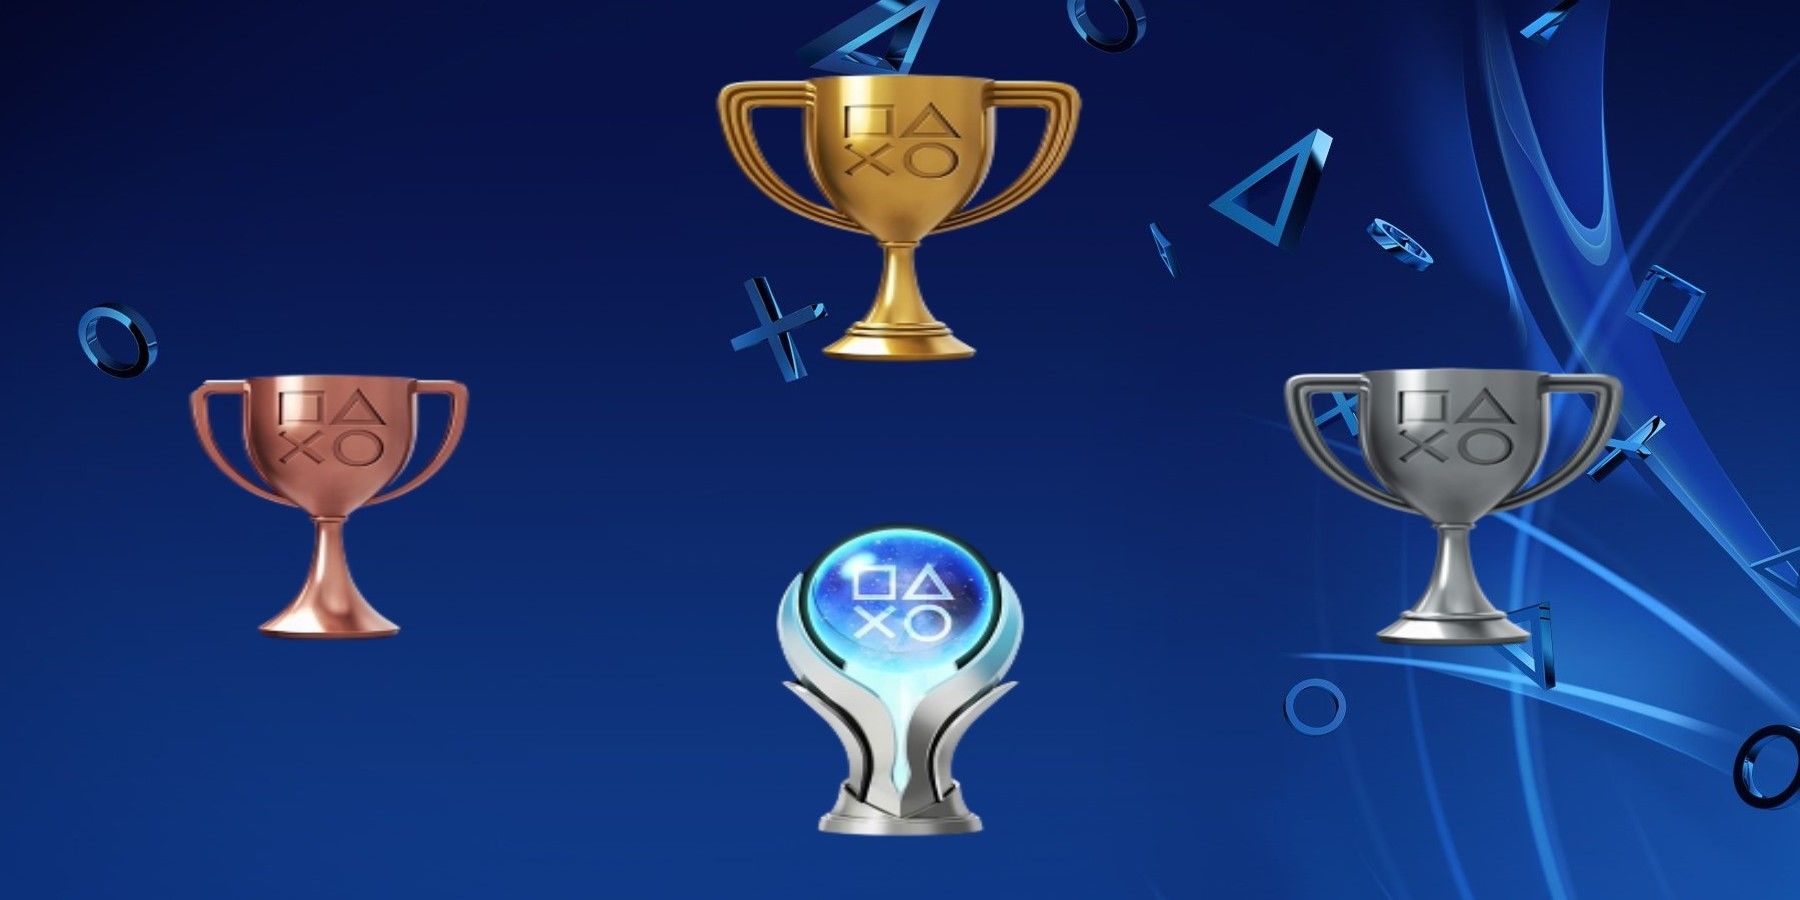 An In-Depth Reward System Could Take PlayStation's Trophies To Next Level